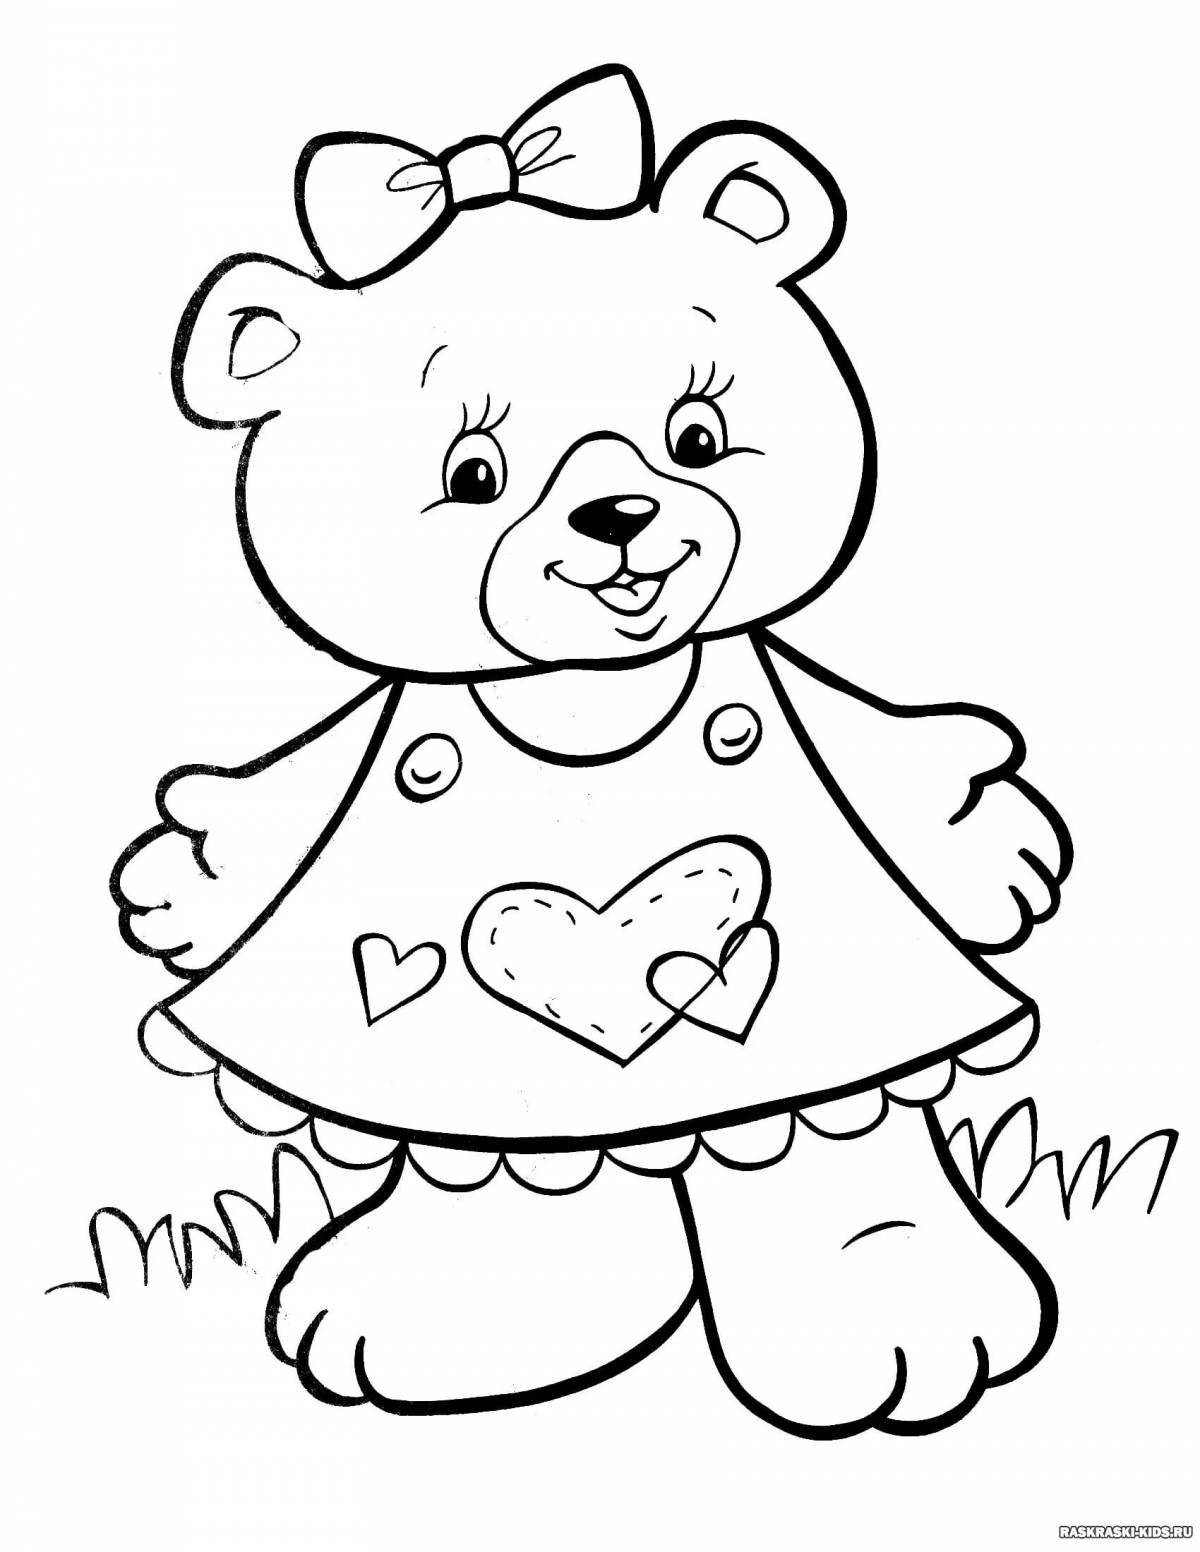 Glorious bear coloring book for girls